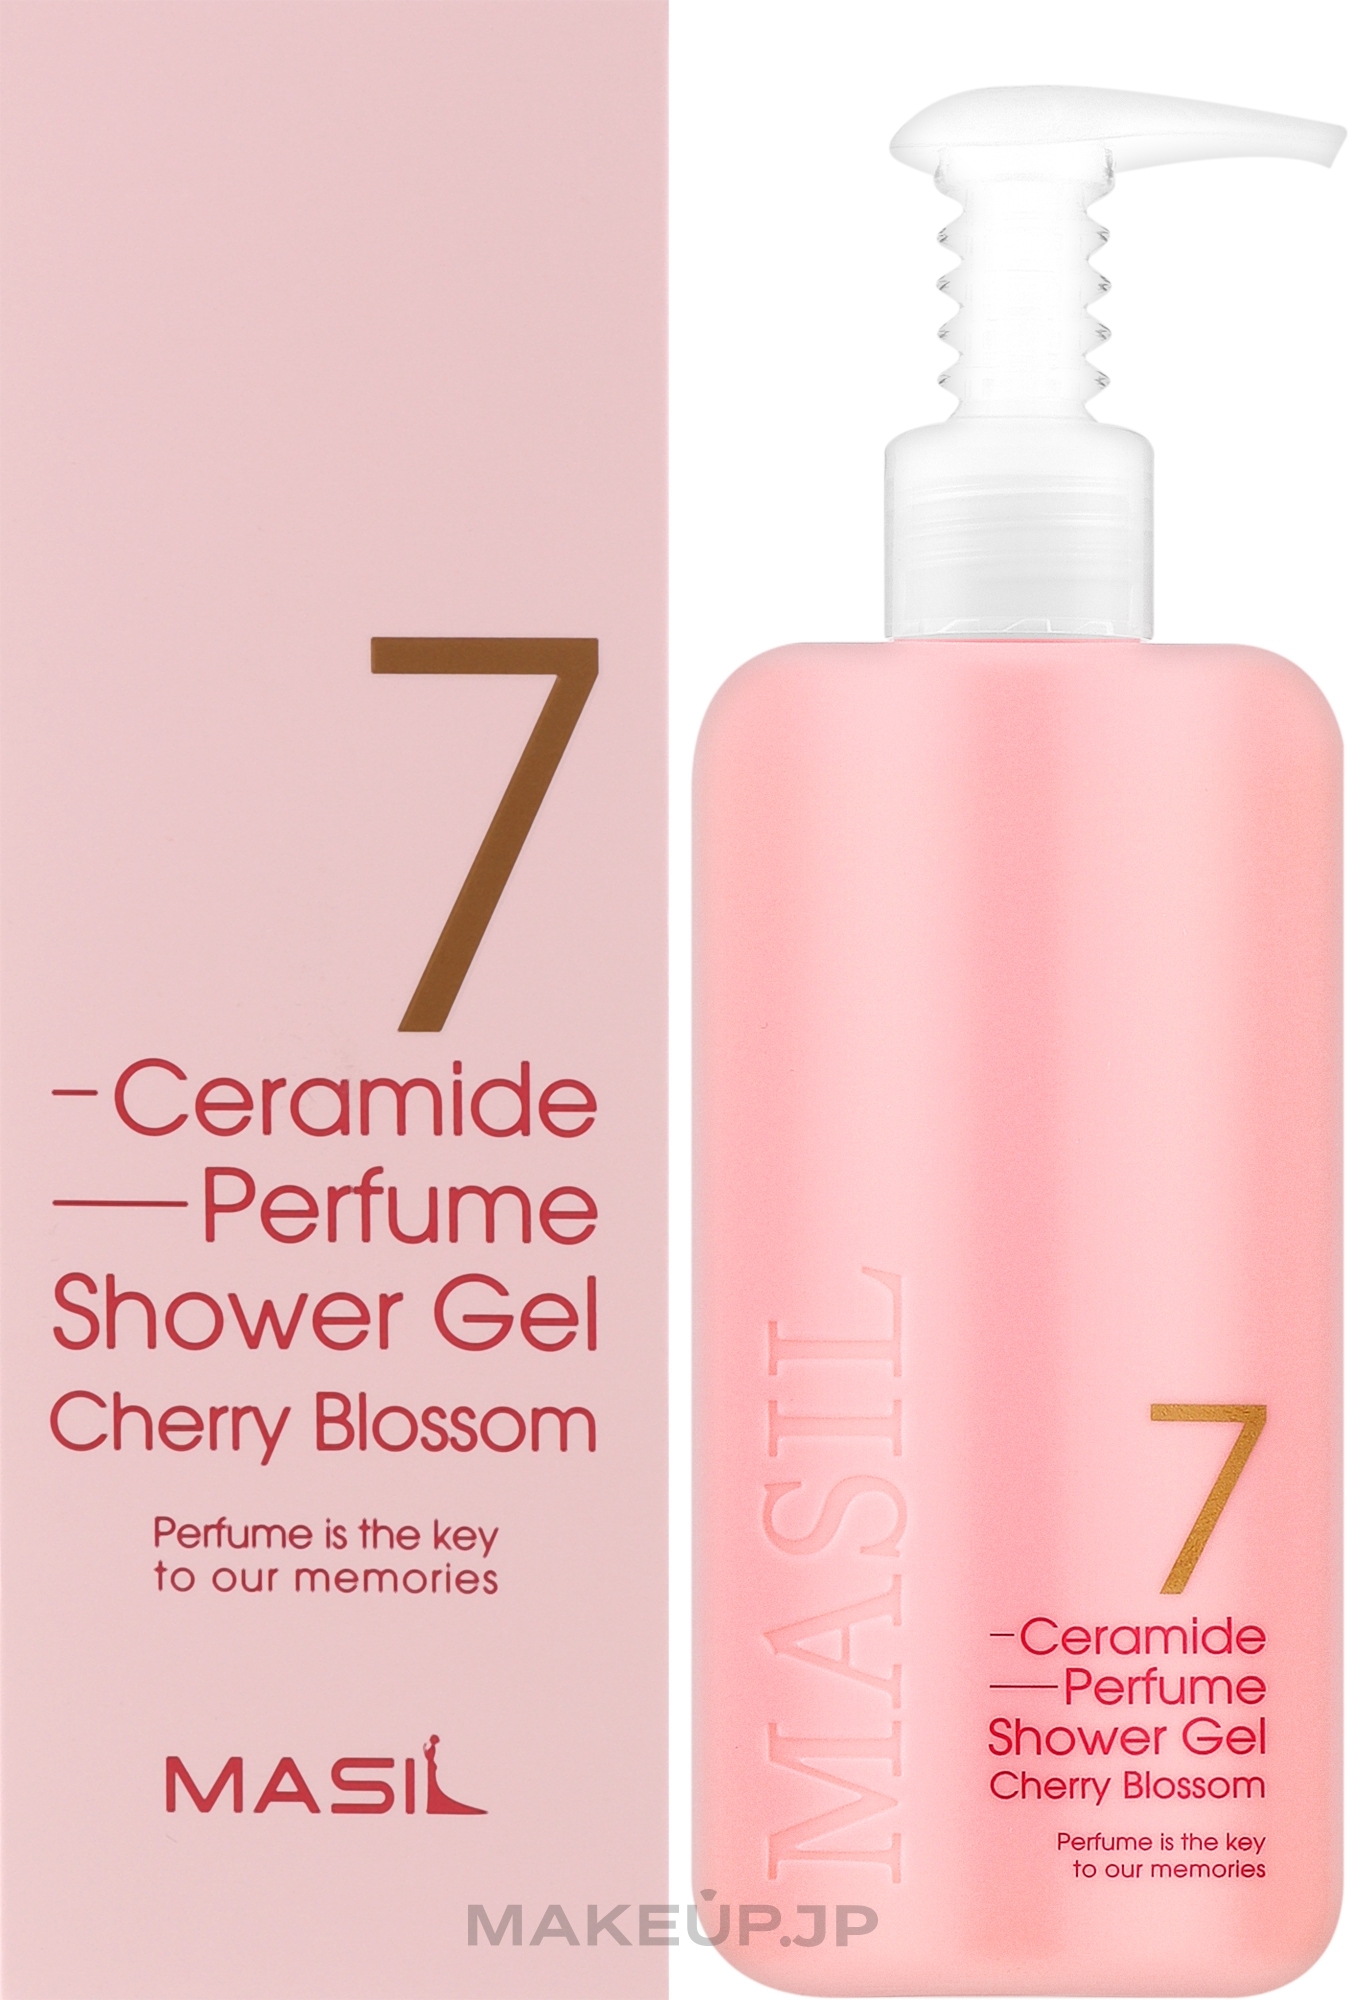 Shower Gel with Cherry Blossom Scent - Masil 7 Ceramide Perfume Shower Gel Cherry Blossom — photo 300 ml